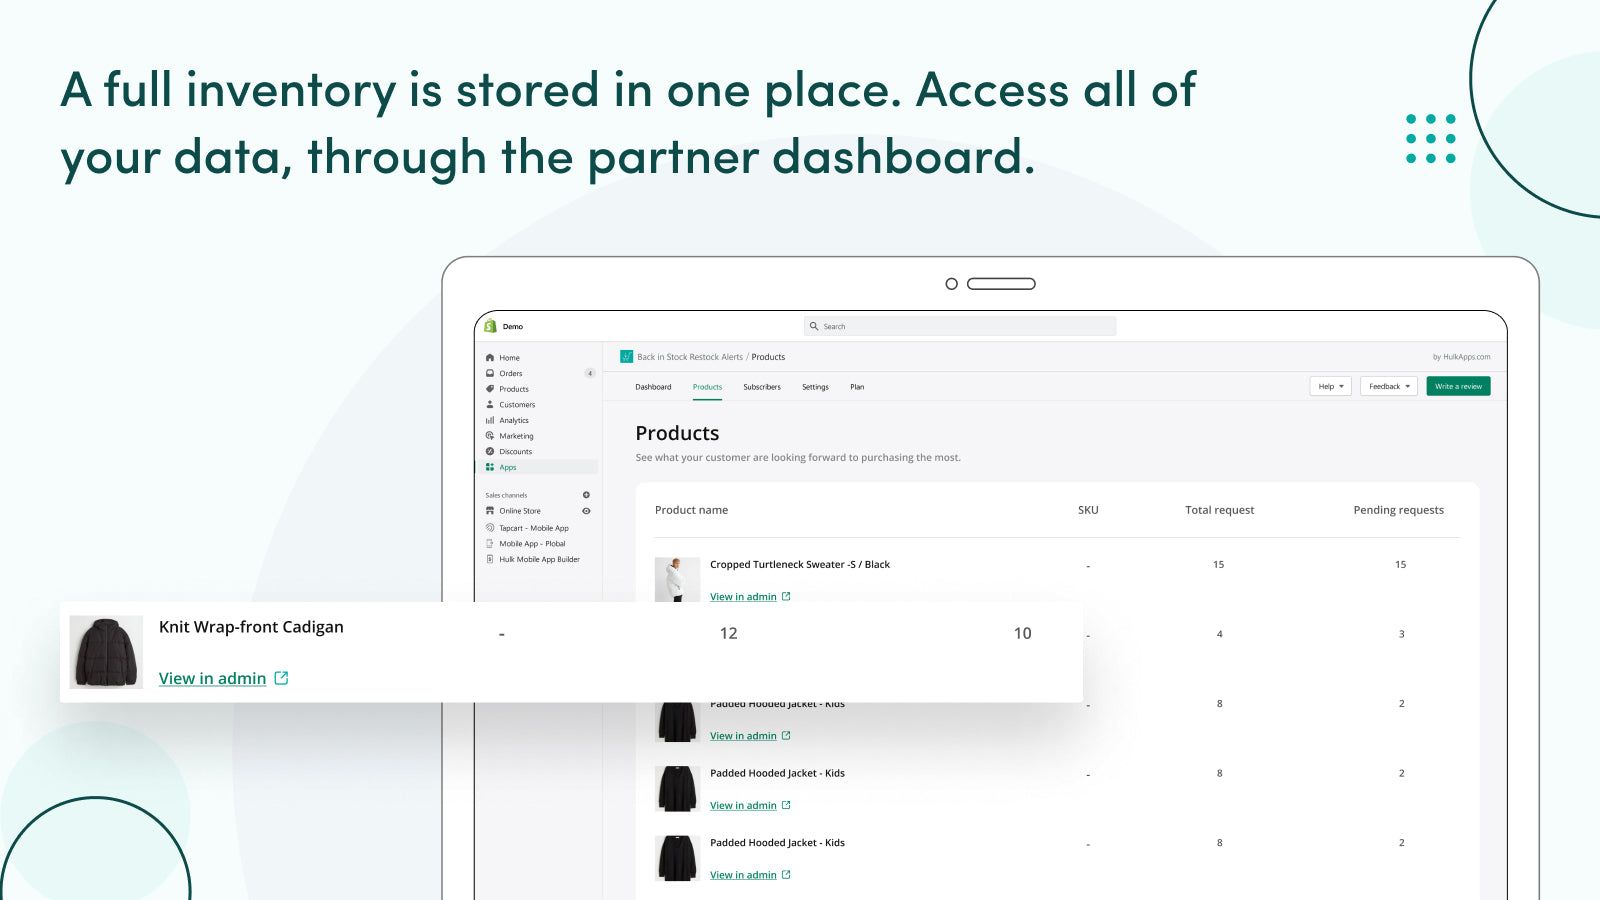 All data is easily accessible through the partner dashboard.